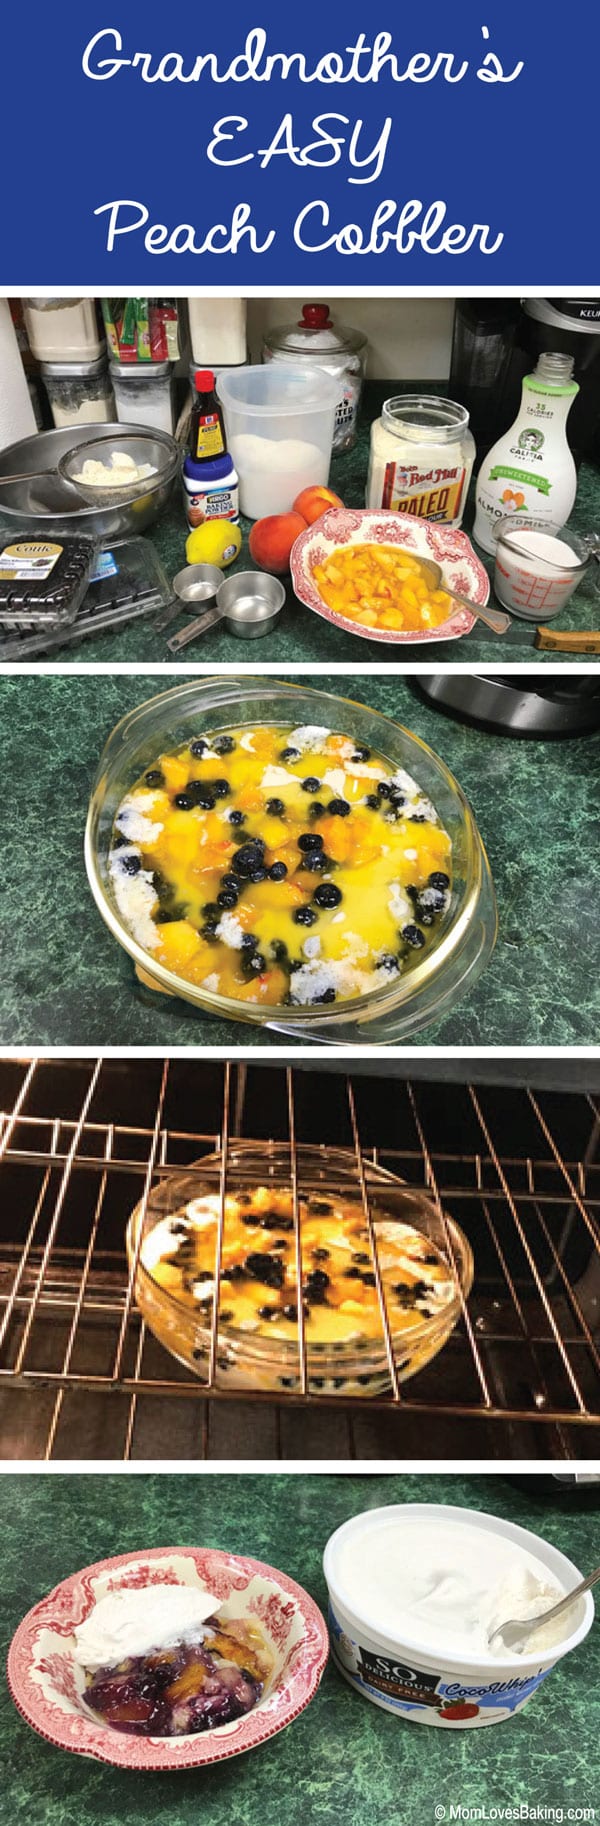 Grandmother's Easy Peach Cobbler with Blueberries